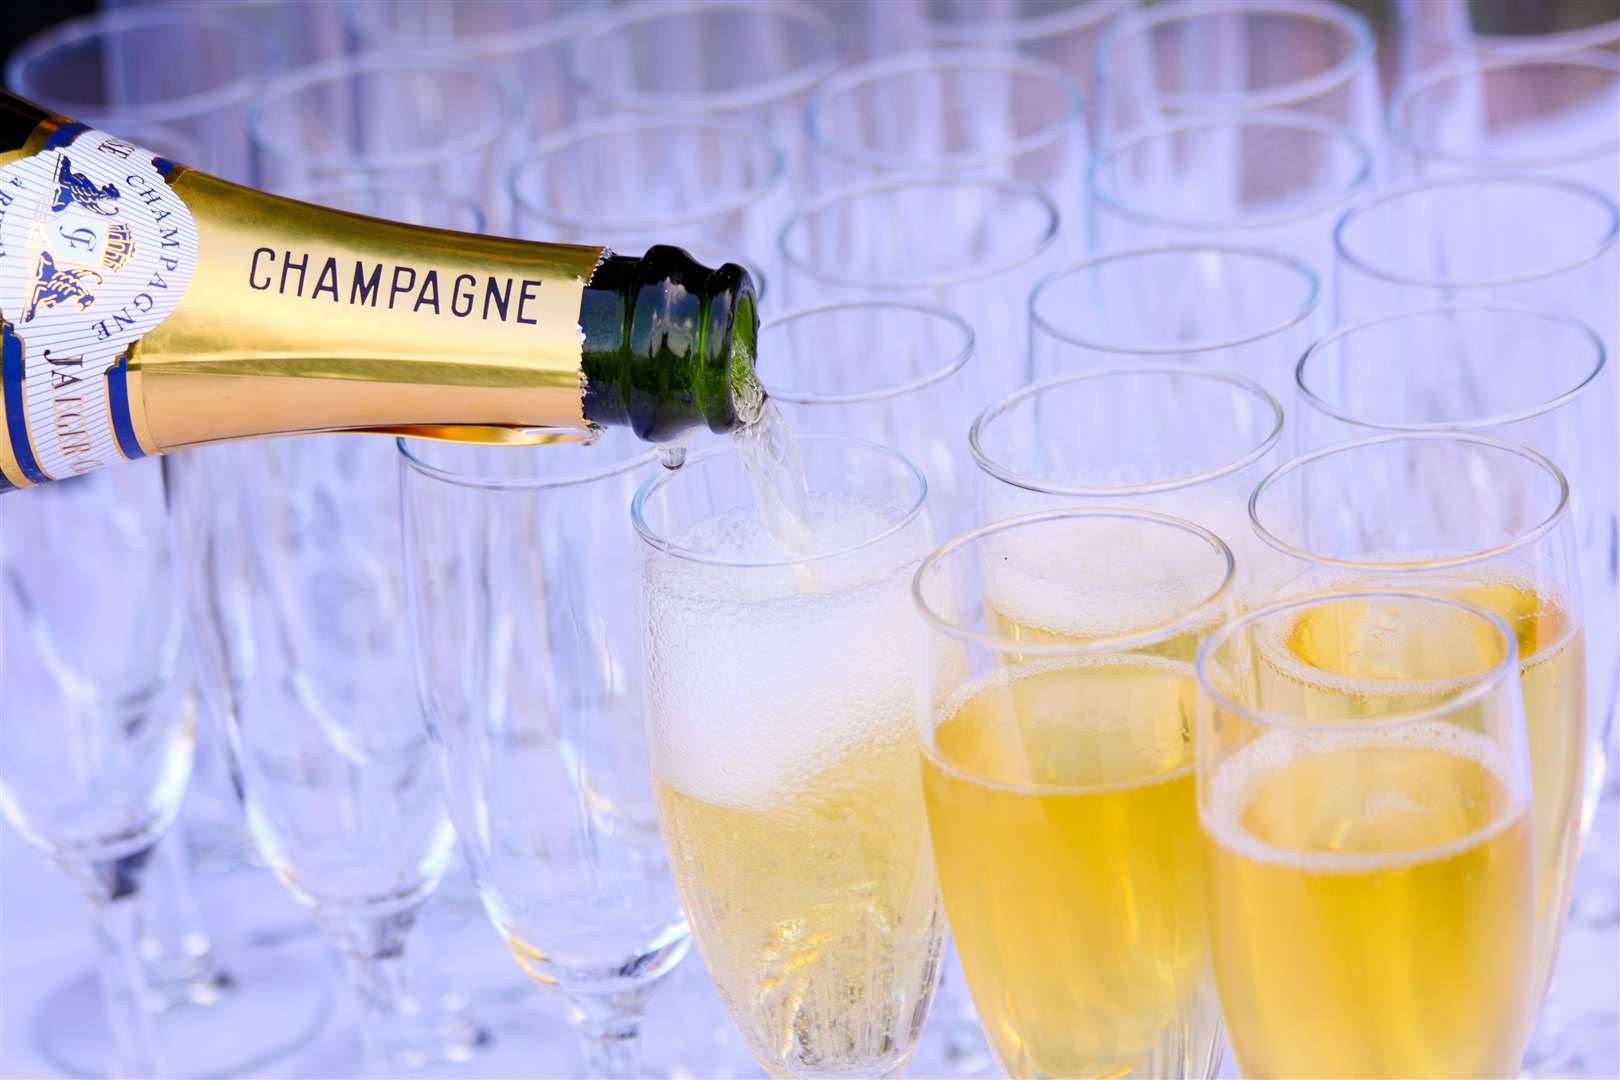 The bubbly will be flowing at the award ceremony.